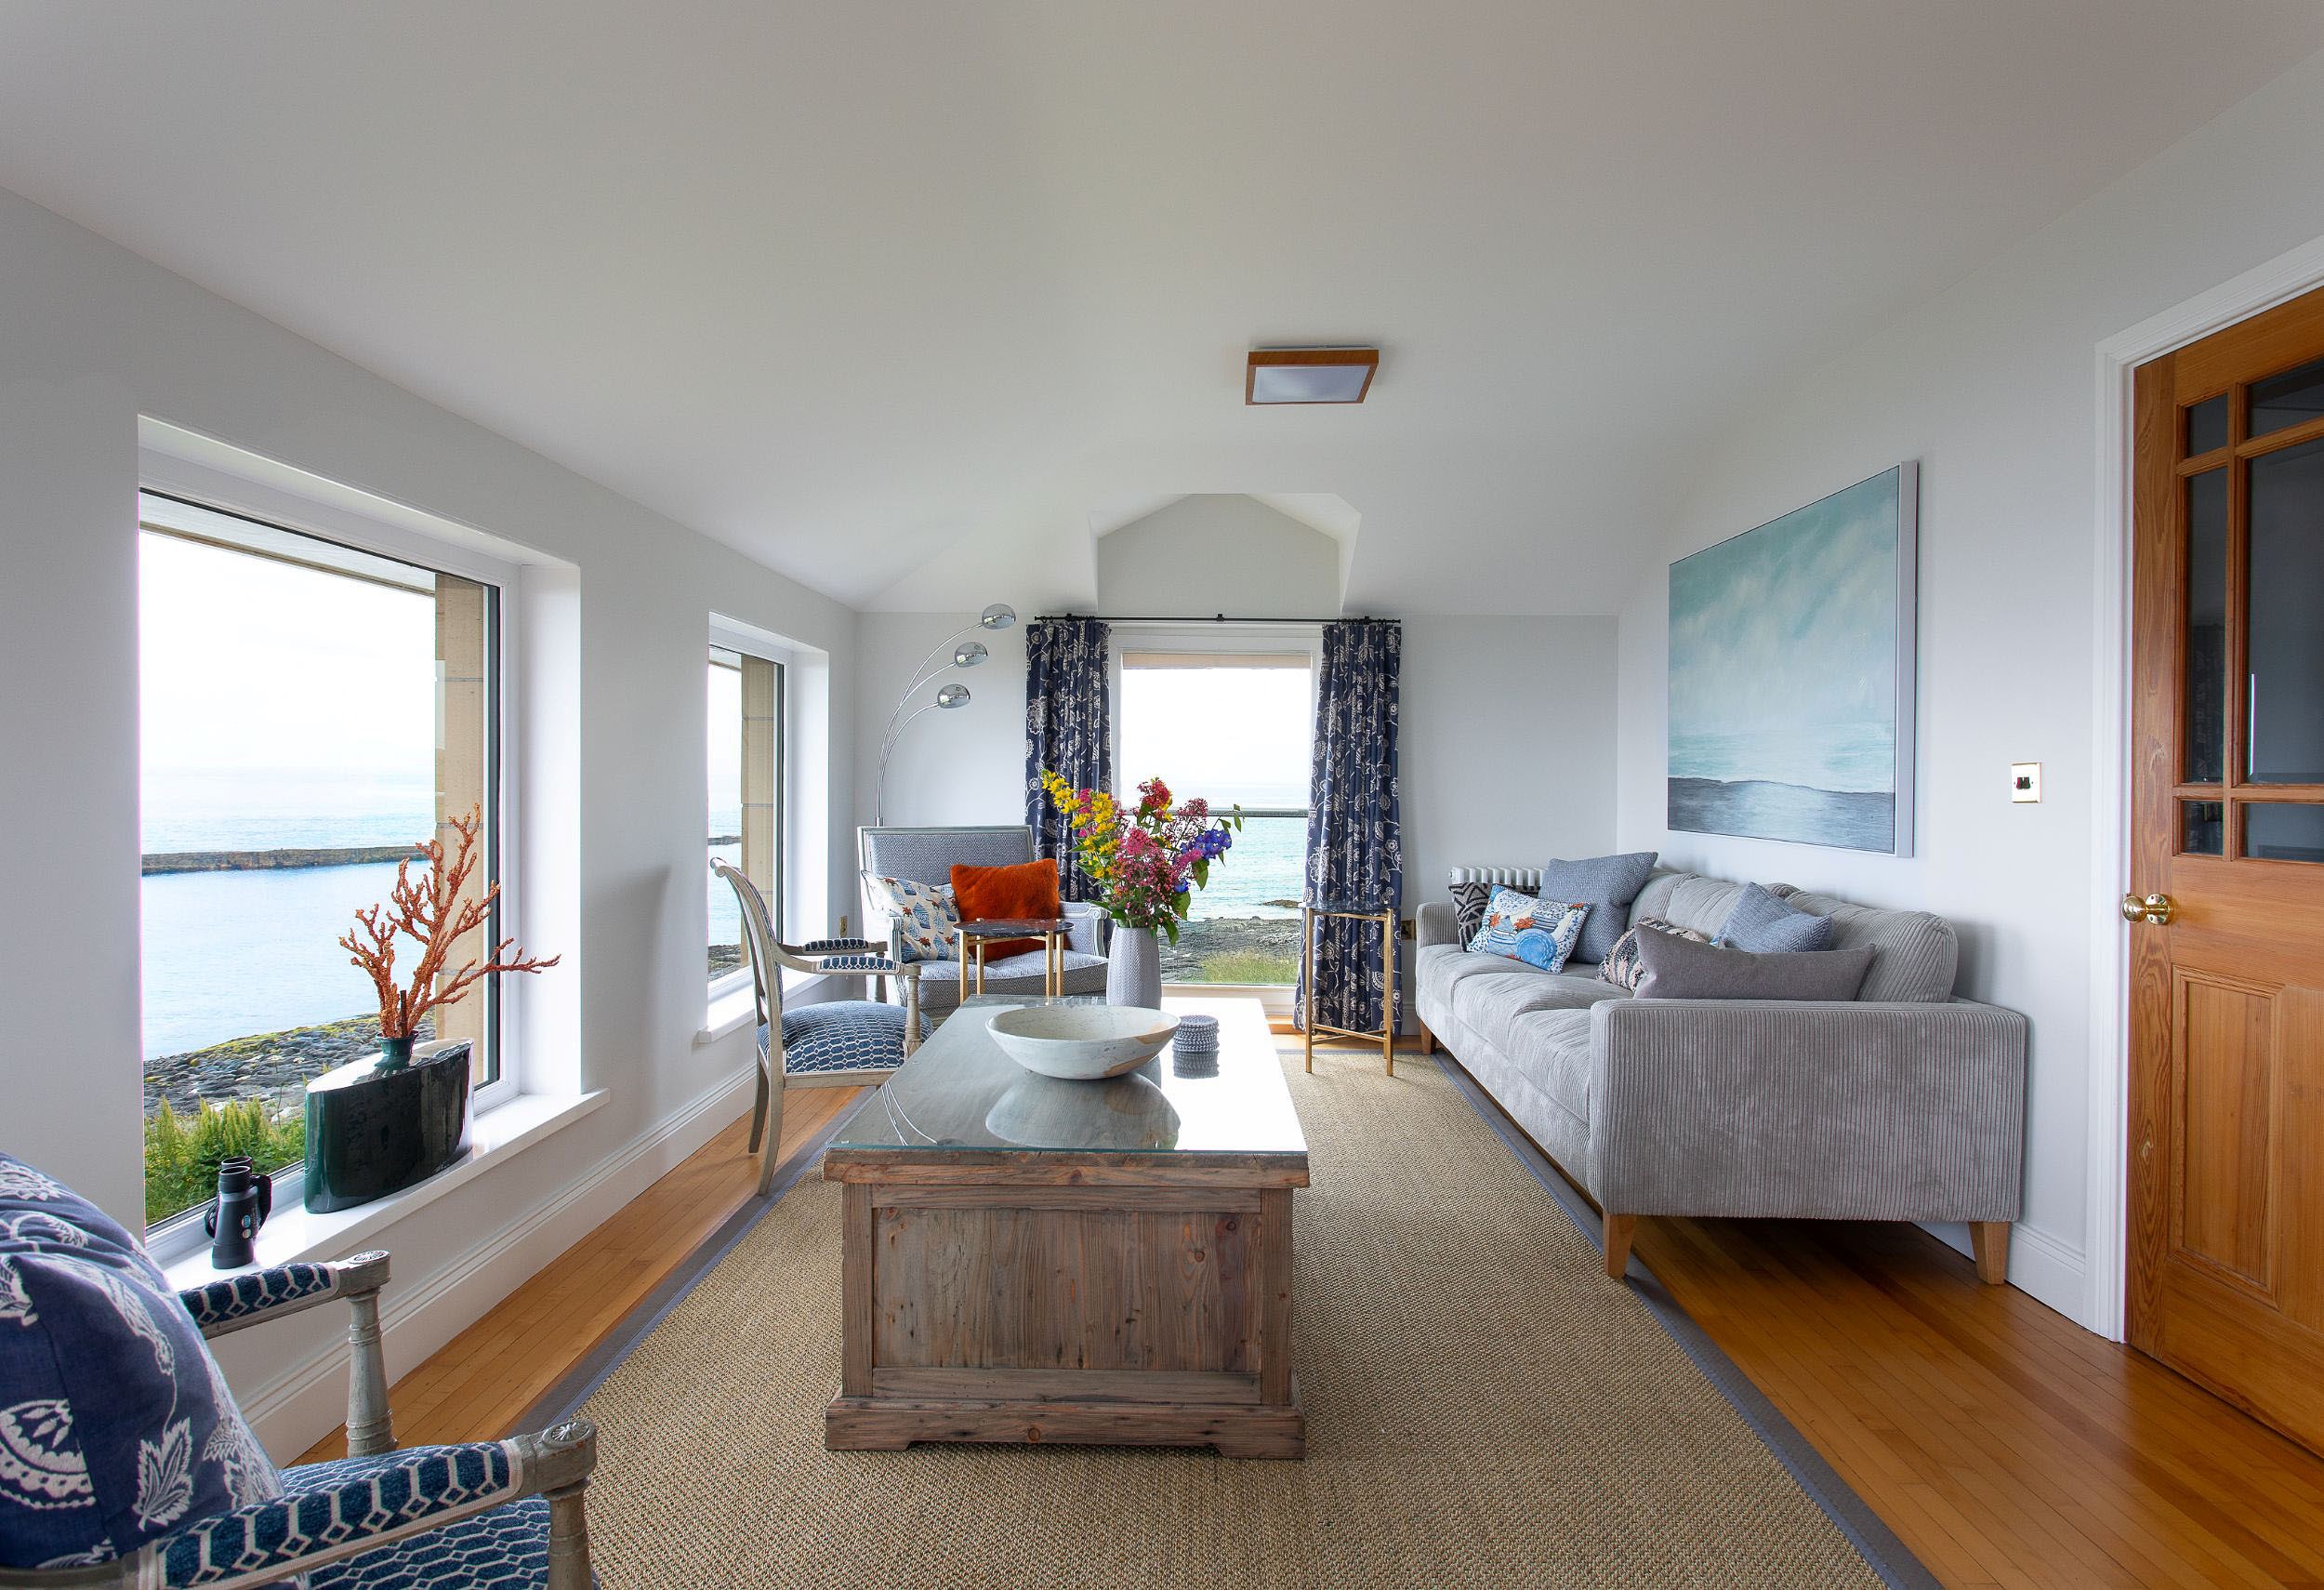 Sea Breeze - sit and enjoy panoramic views from the first floor sitting room